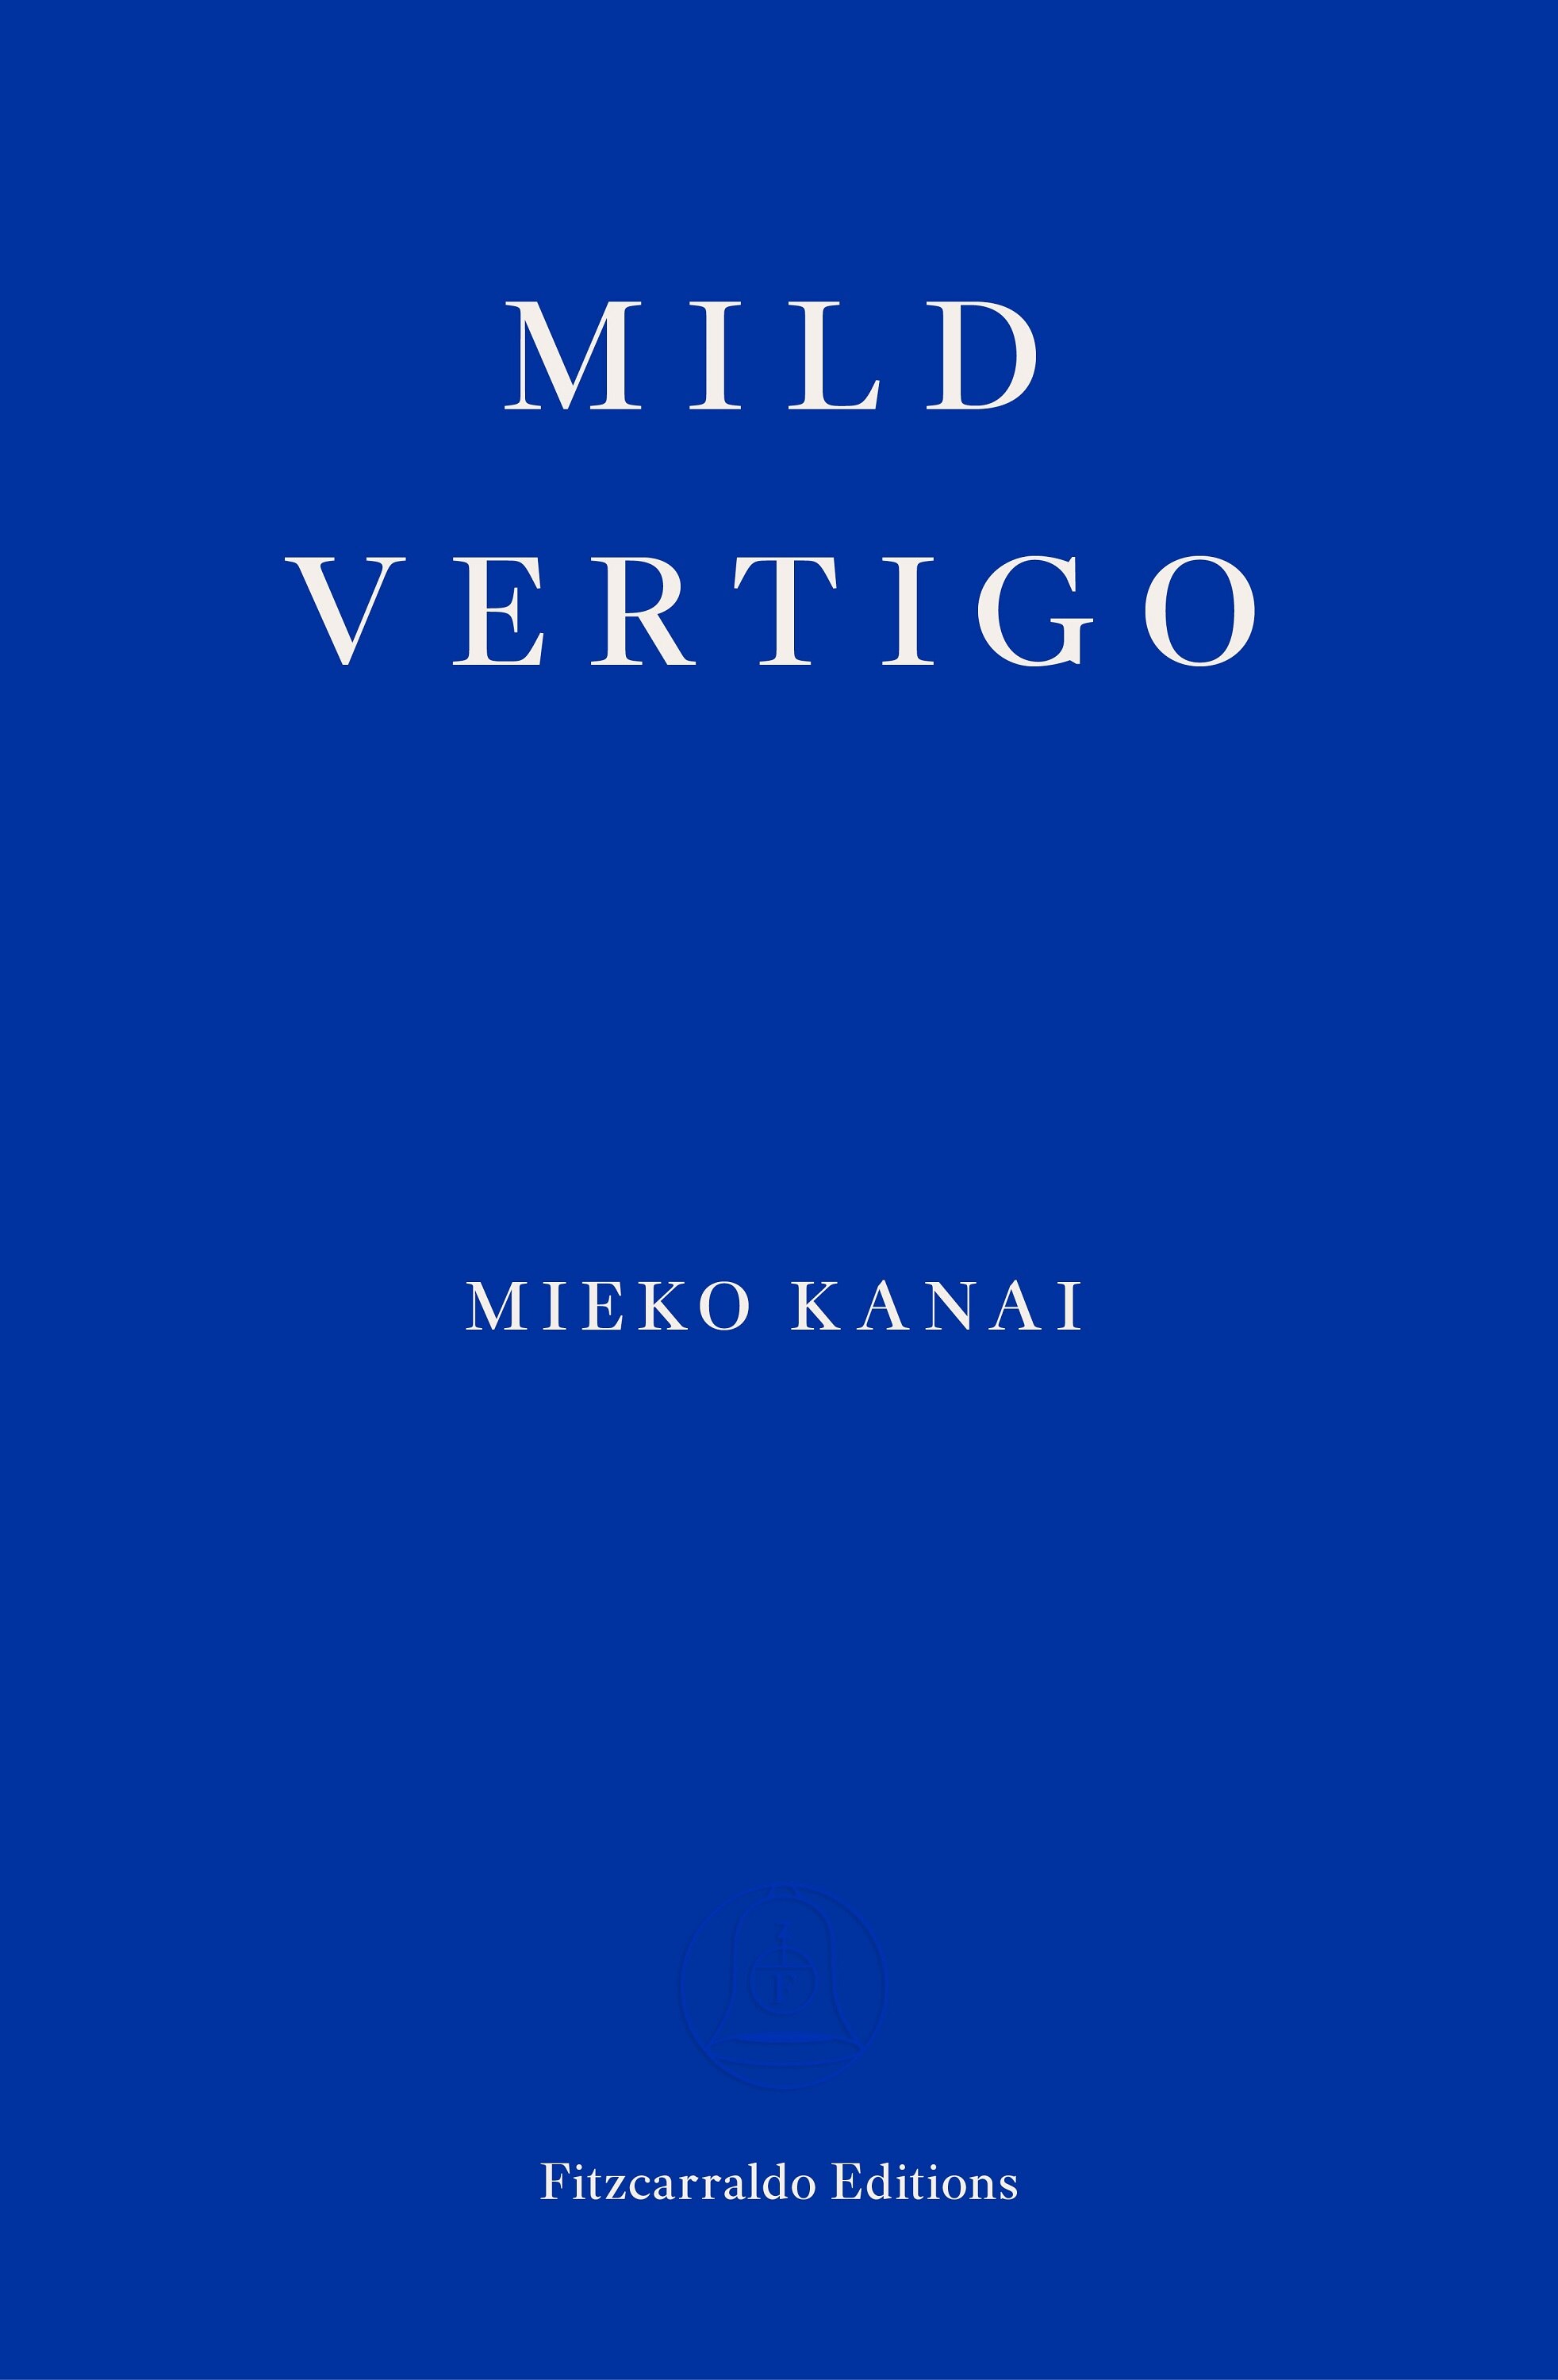 A book cover with text printed on a solid blue background